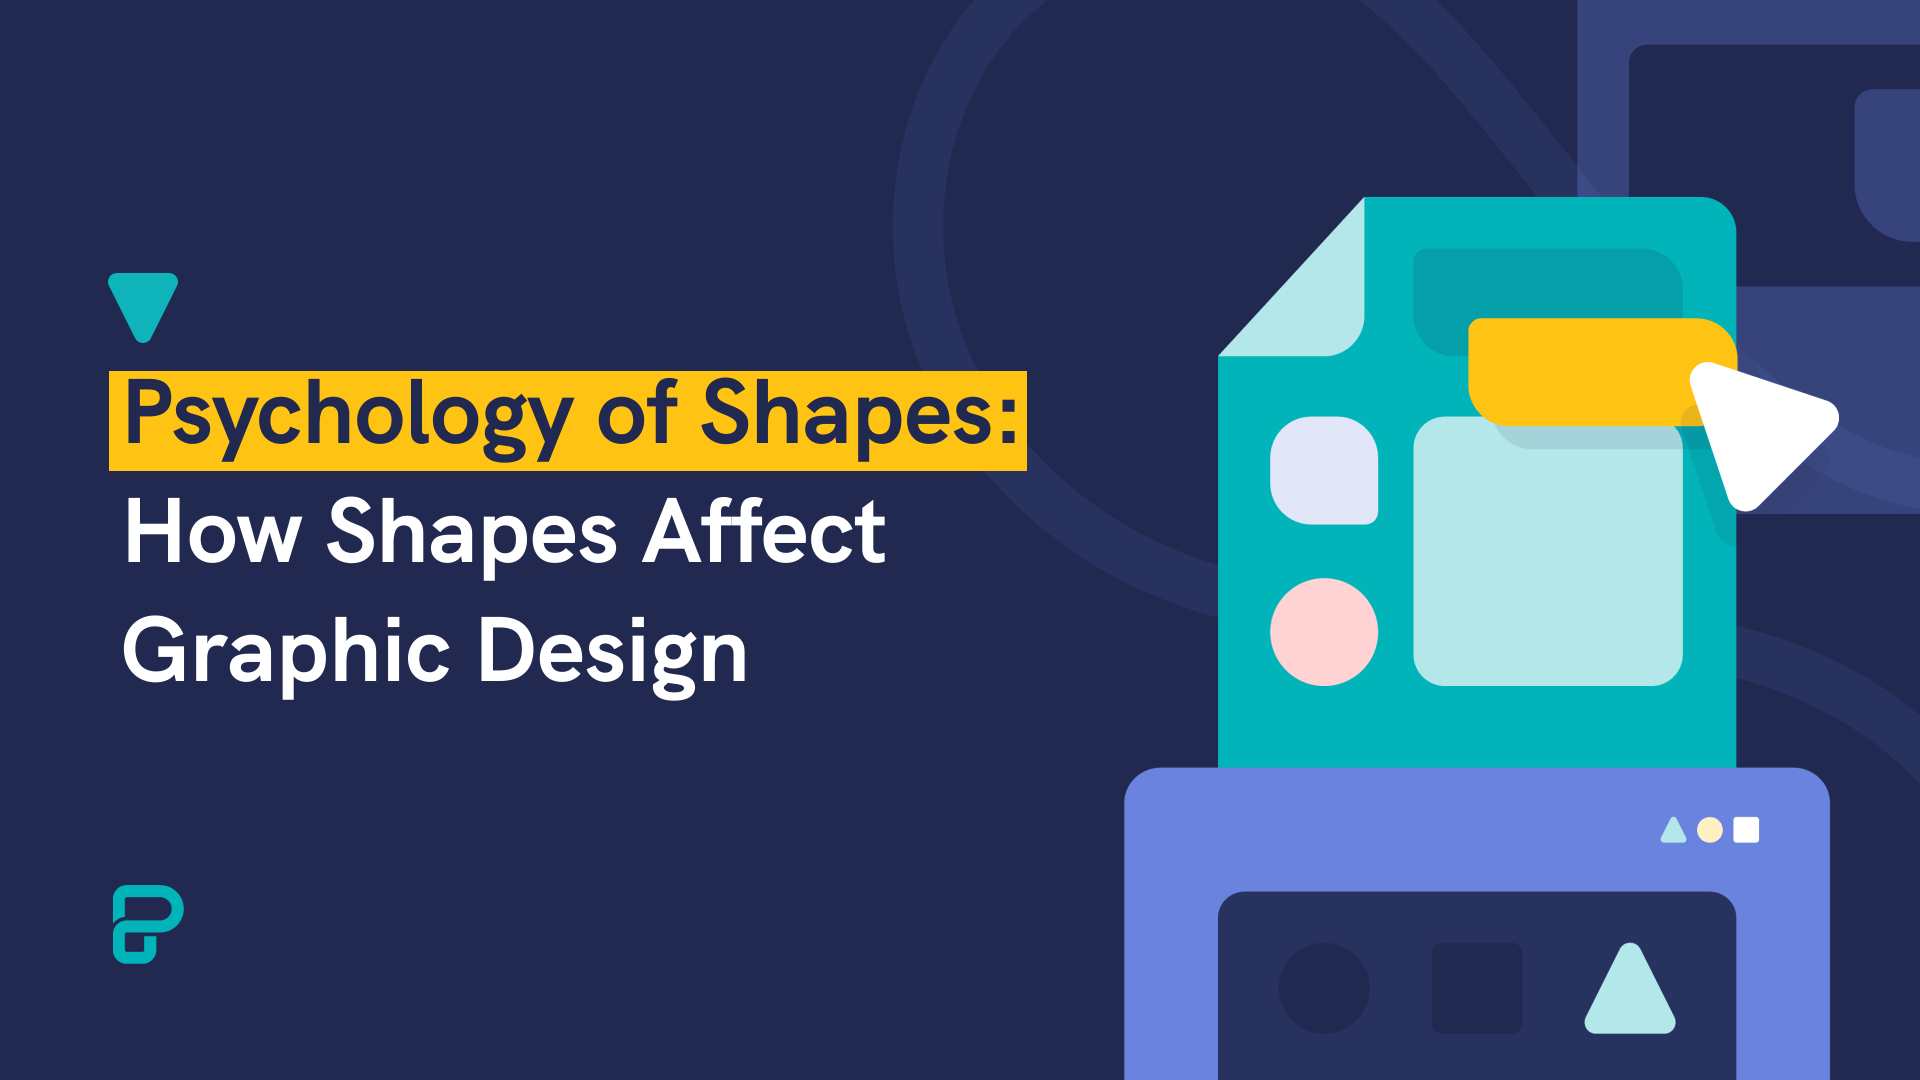 Psychology of shapes: How shapes affect graphic design